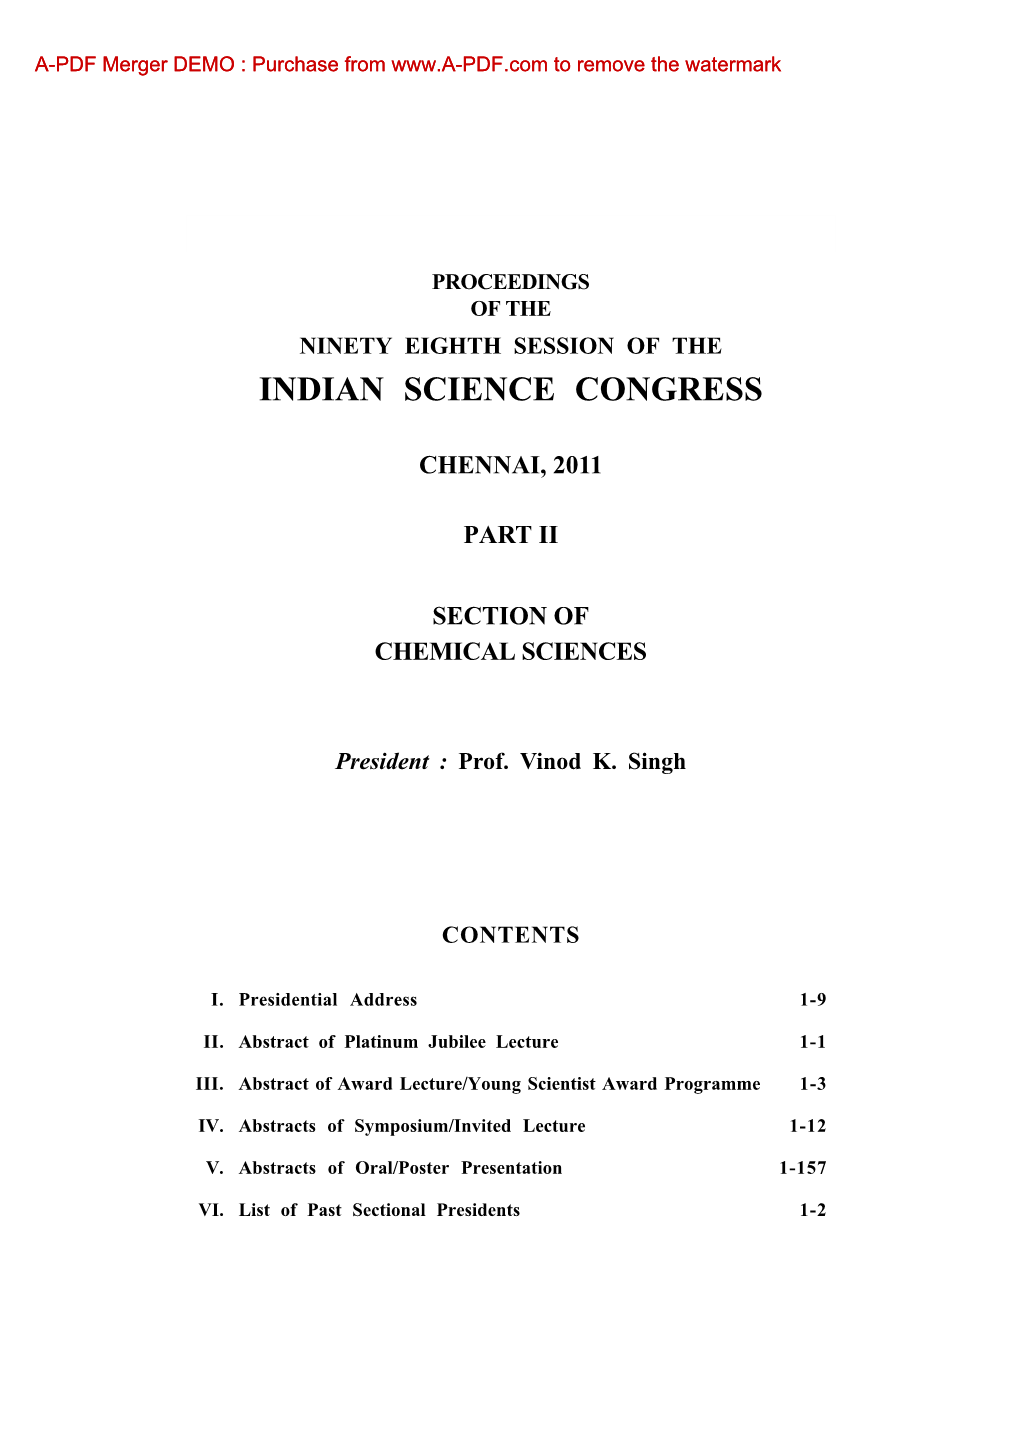 Indian Science Congress, Part II : Presidential Address